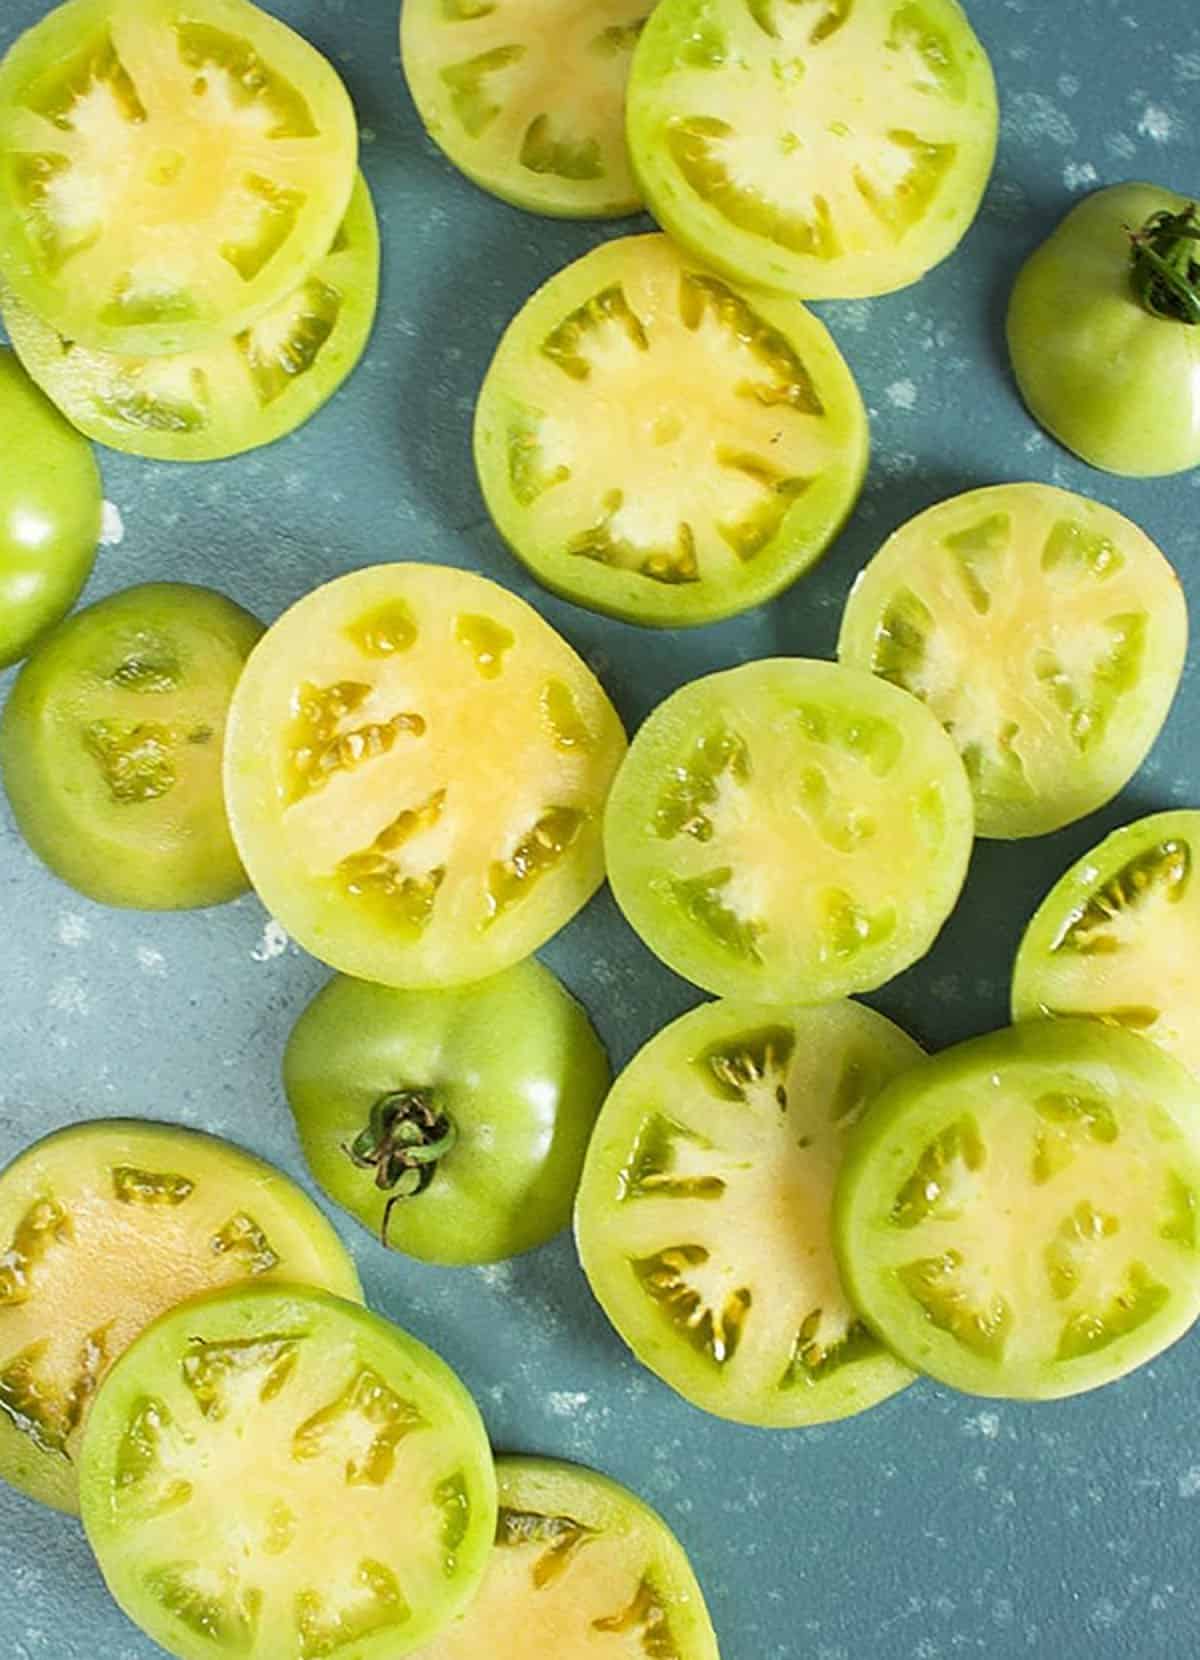 photo of sliced green tomatoes on a blue